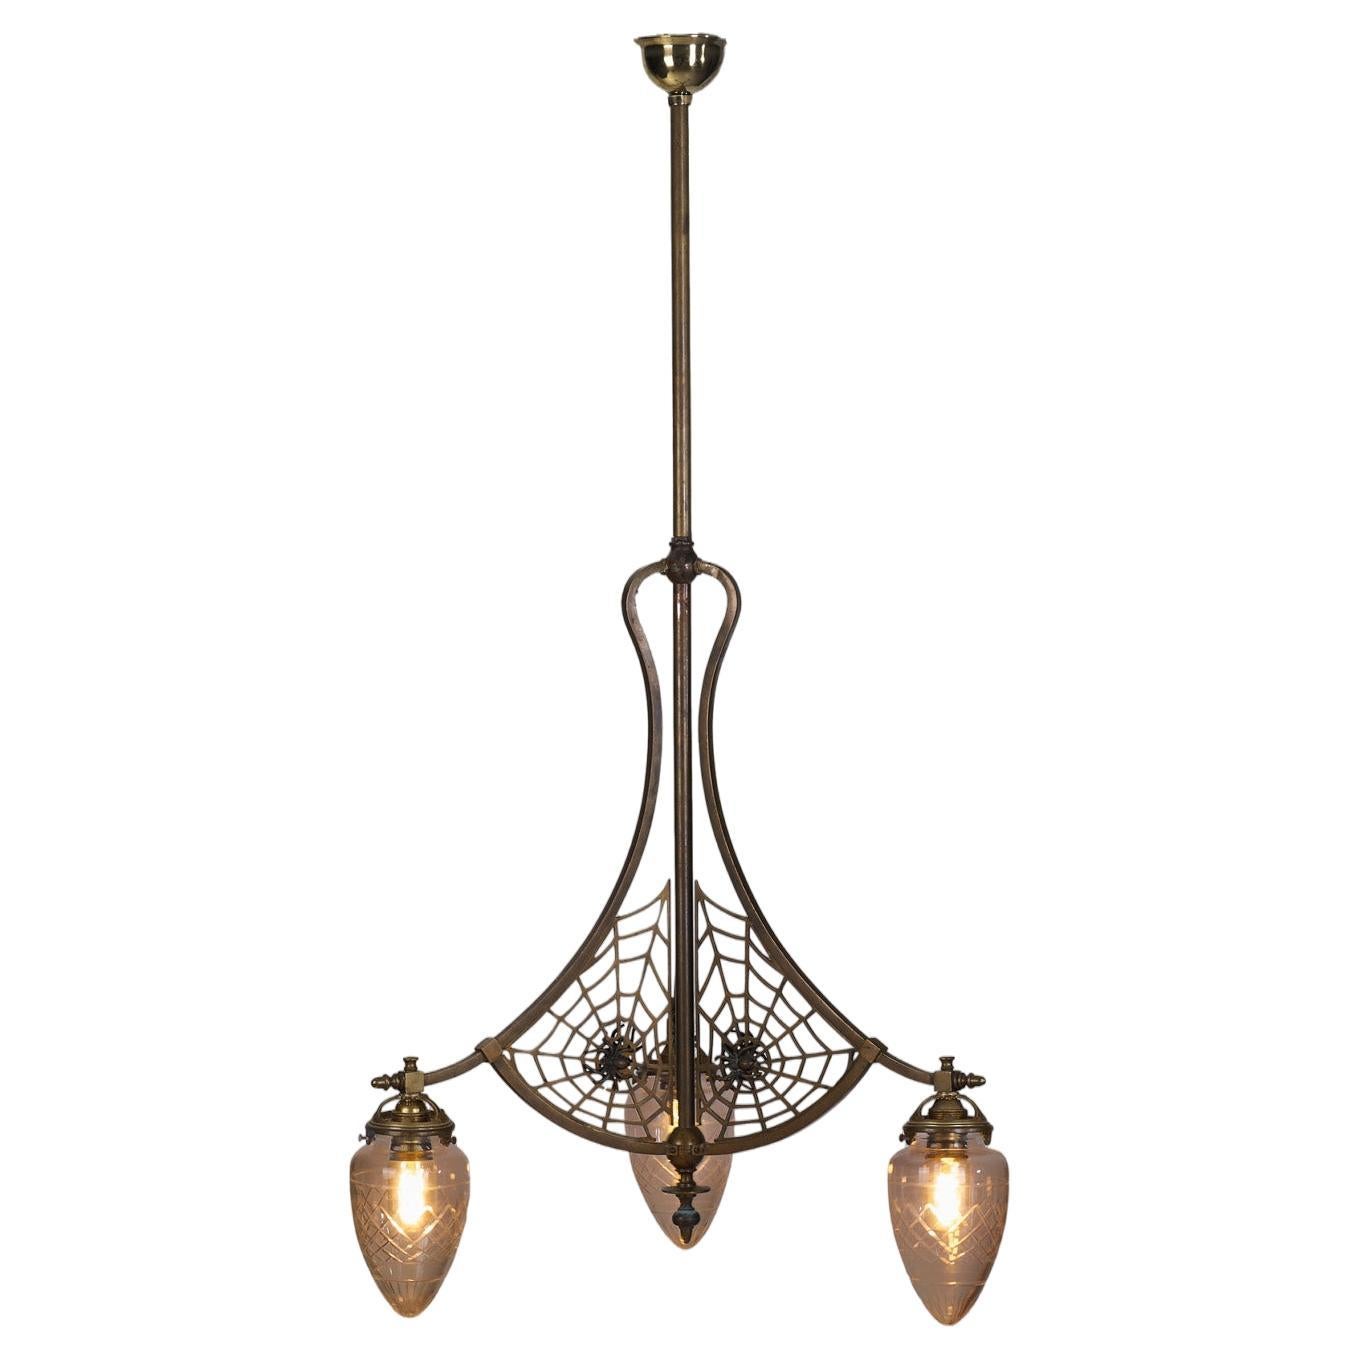 Art Nouveau Brass Ceiling Lamp with Glass Shades and Spider Nets, Europe 1900s